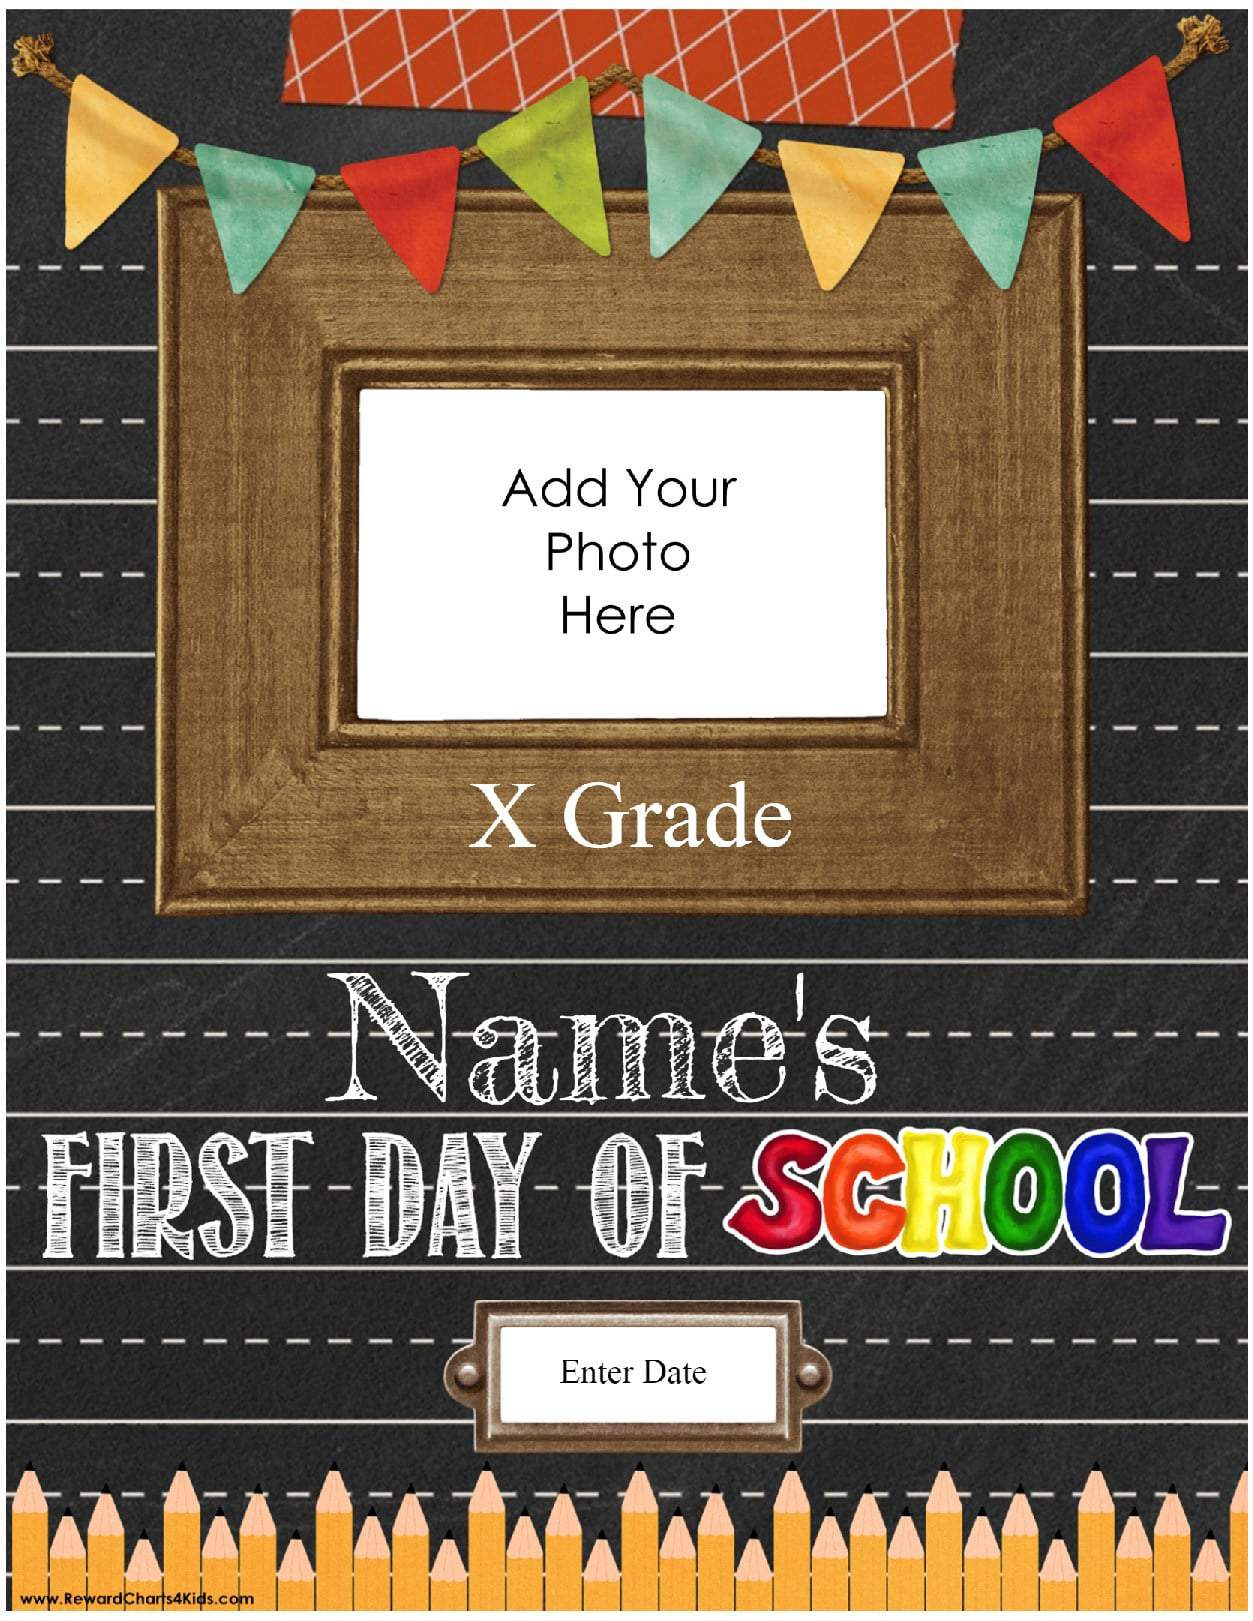 First Day Of School Certificate - Free Printable First Day Of School Certificate